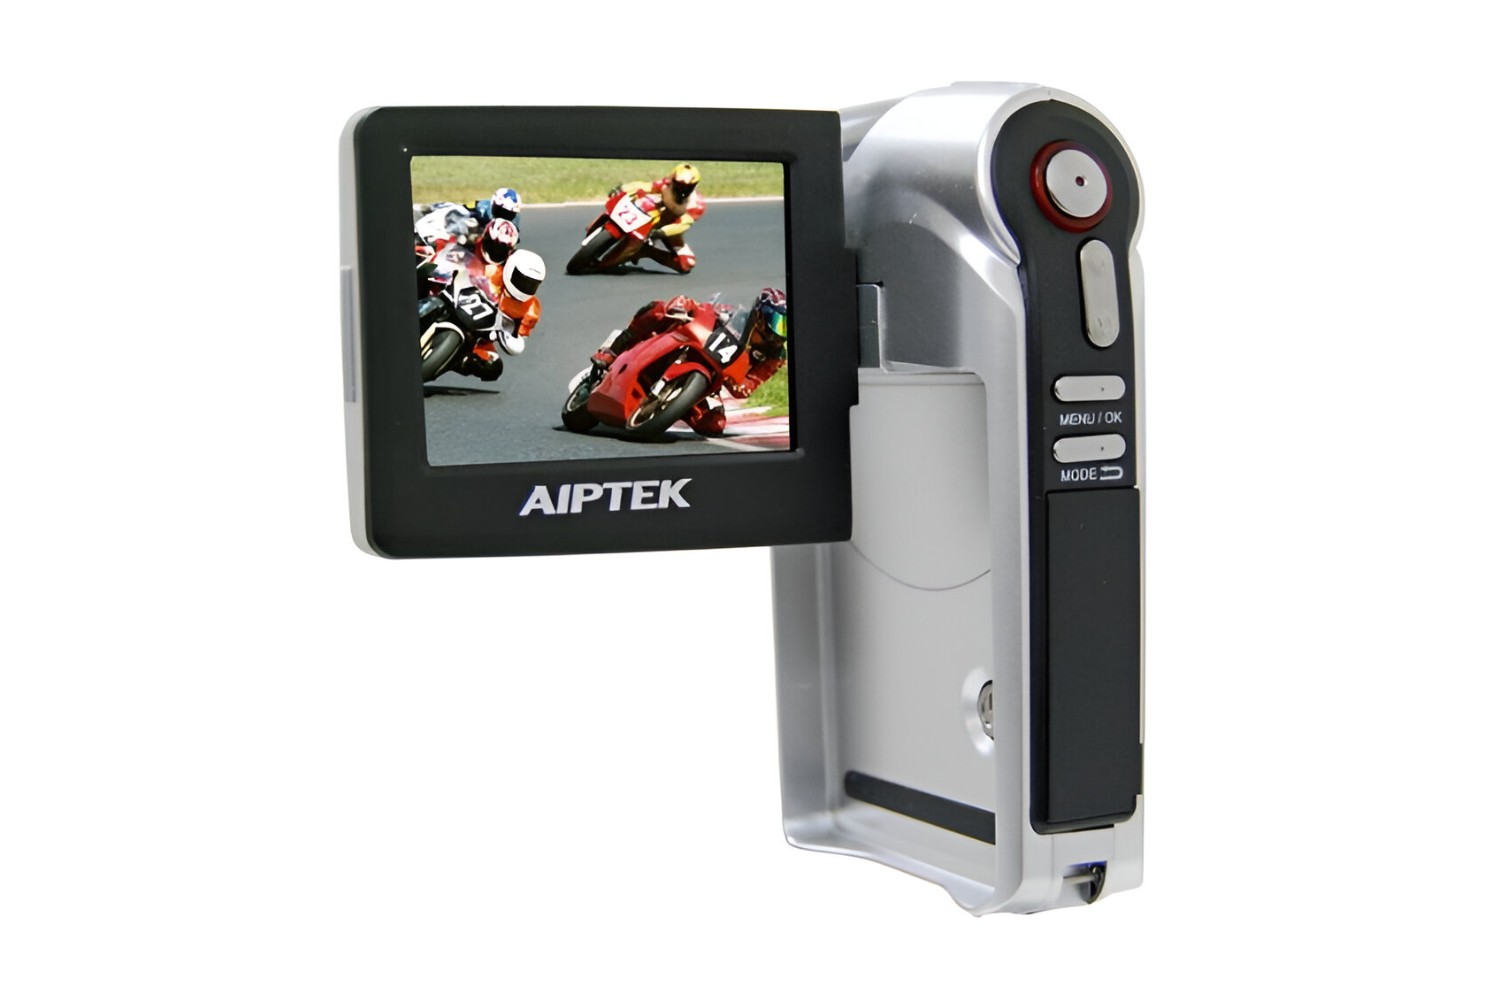 Where Is The IR Lens In Aiptek 720P HD Camcorder